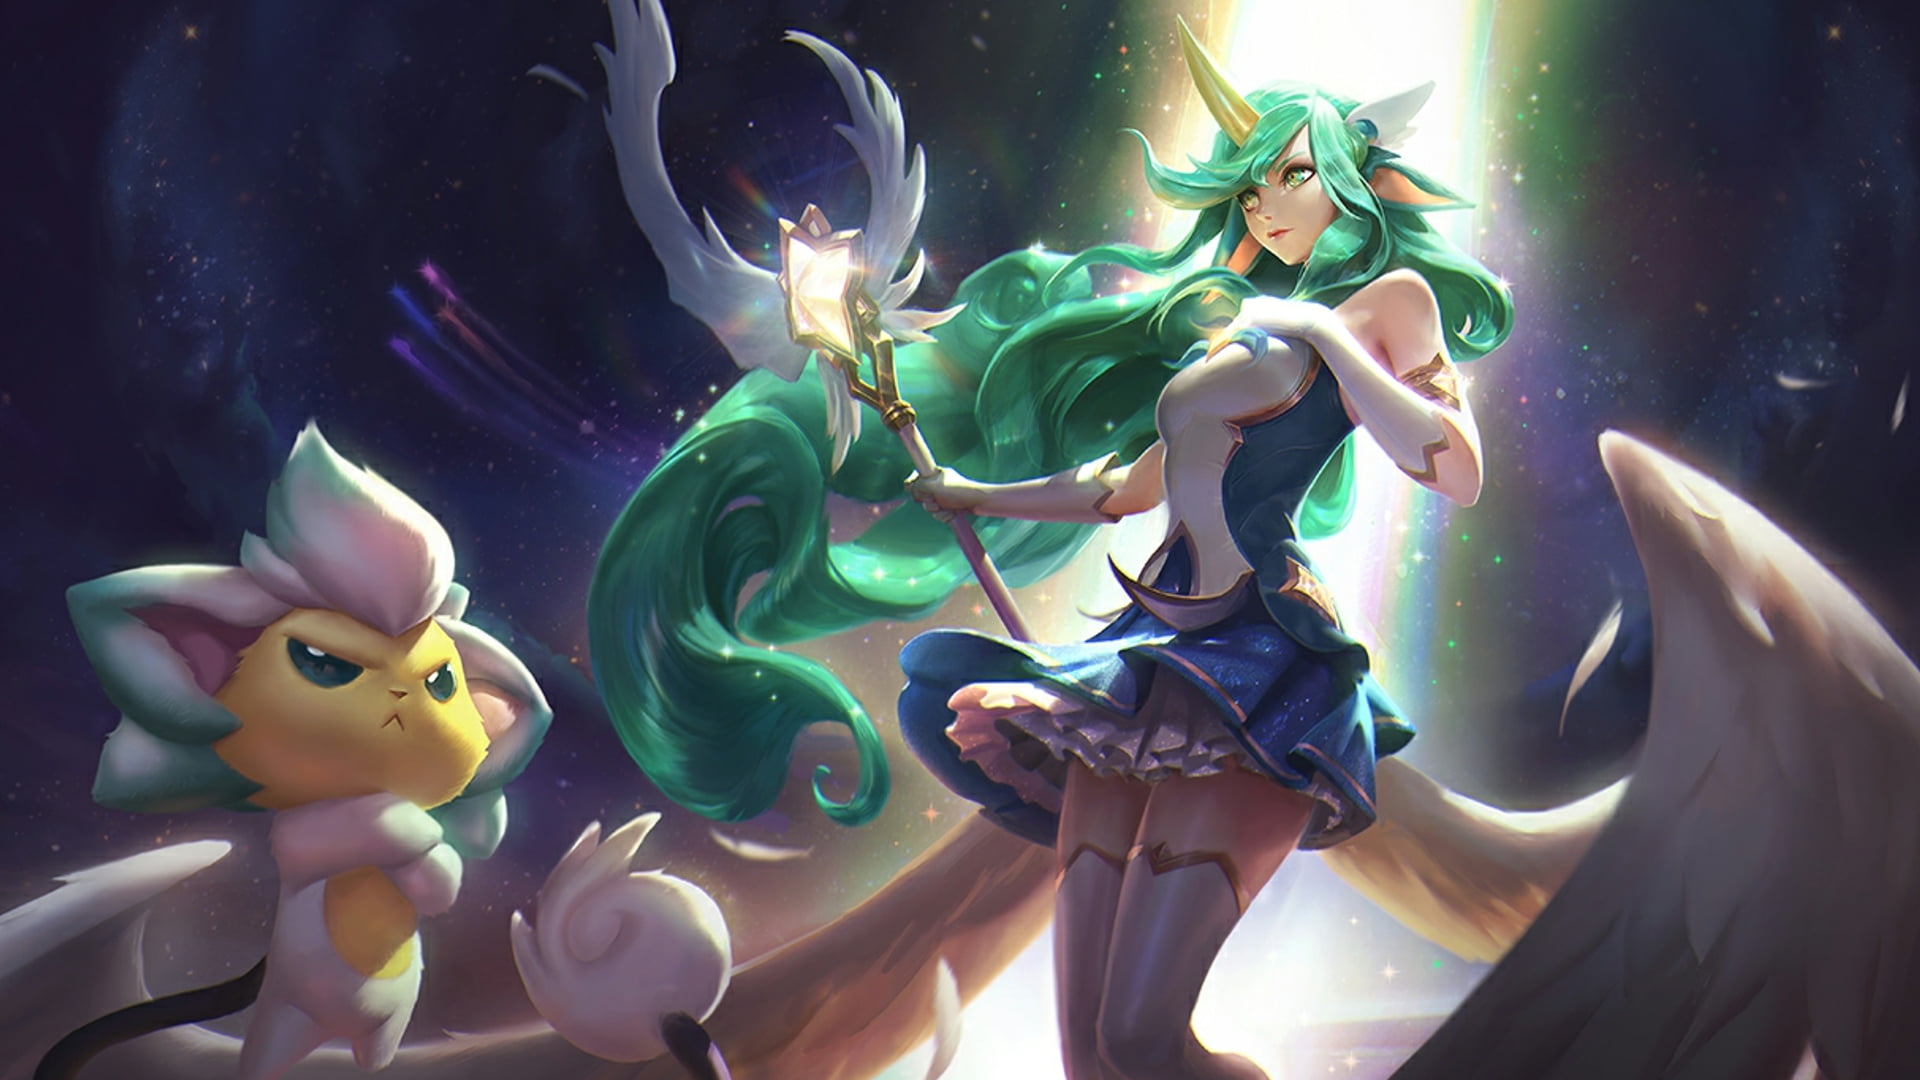 green-haired female animated character, Summoner's Rift, League of Legends, Star Guardian, anime